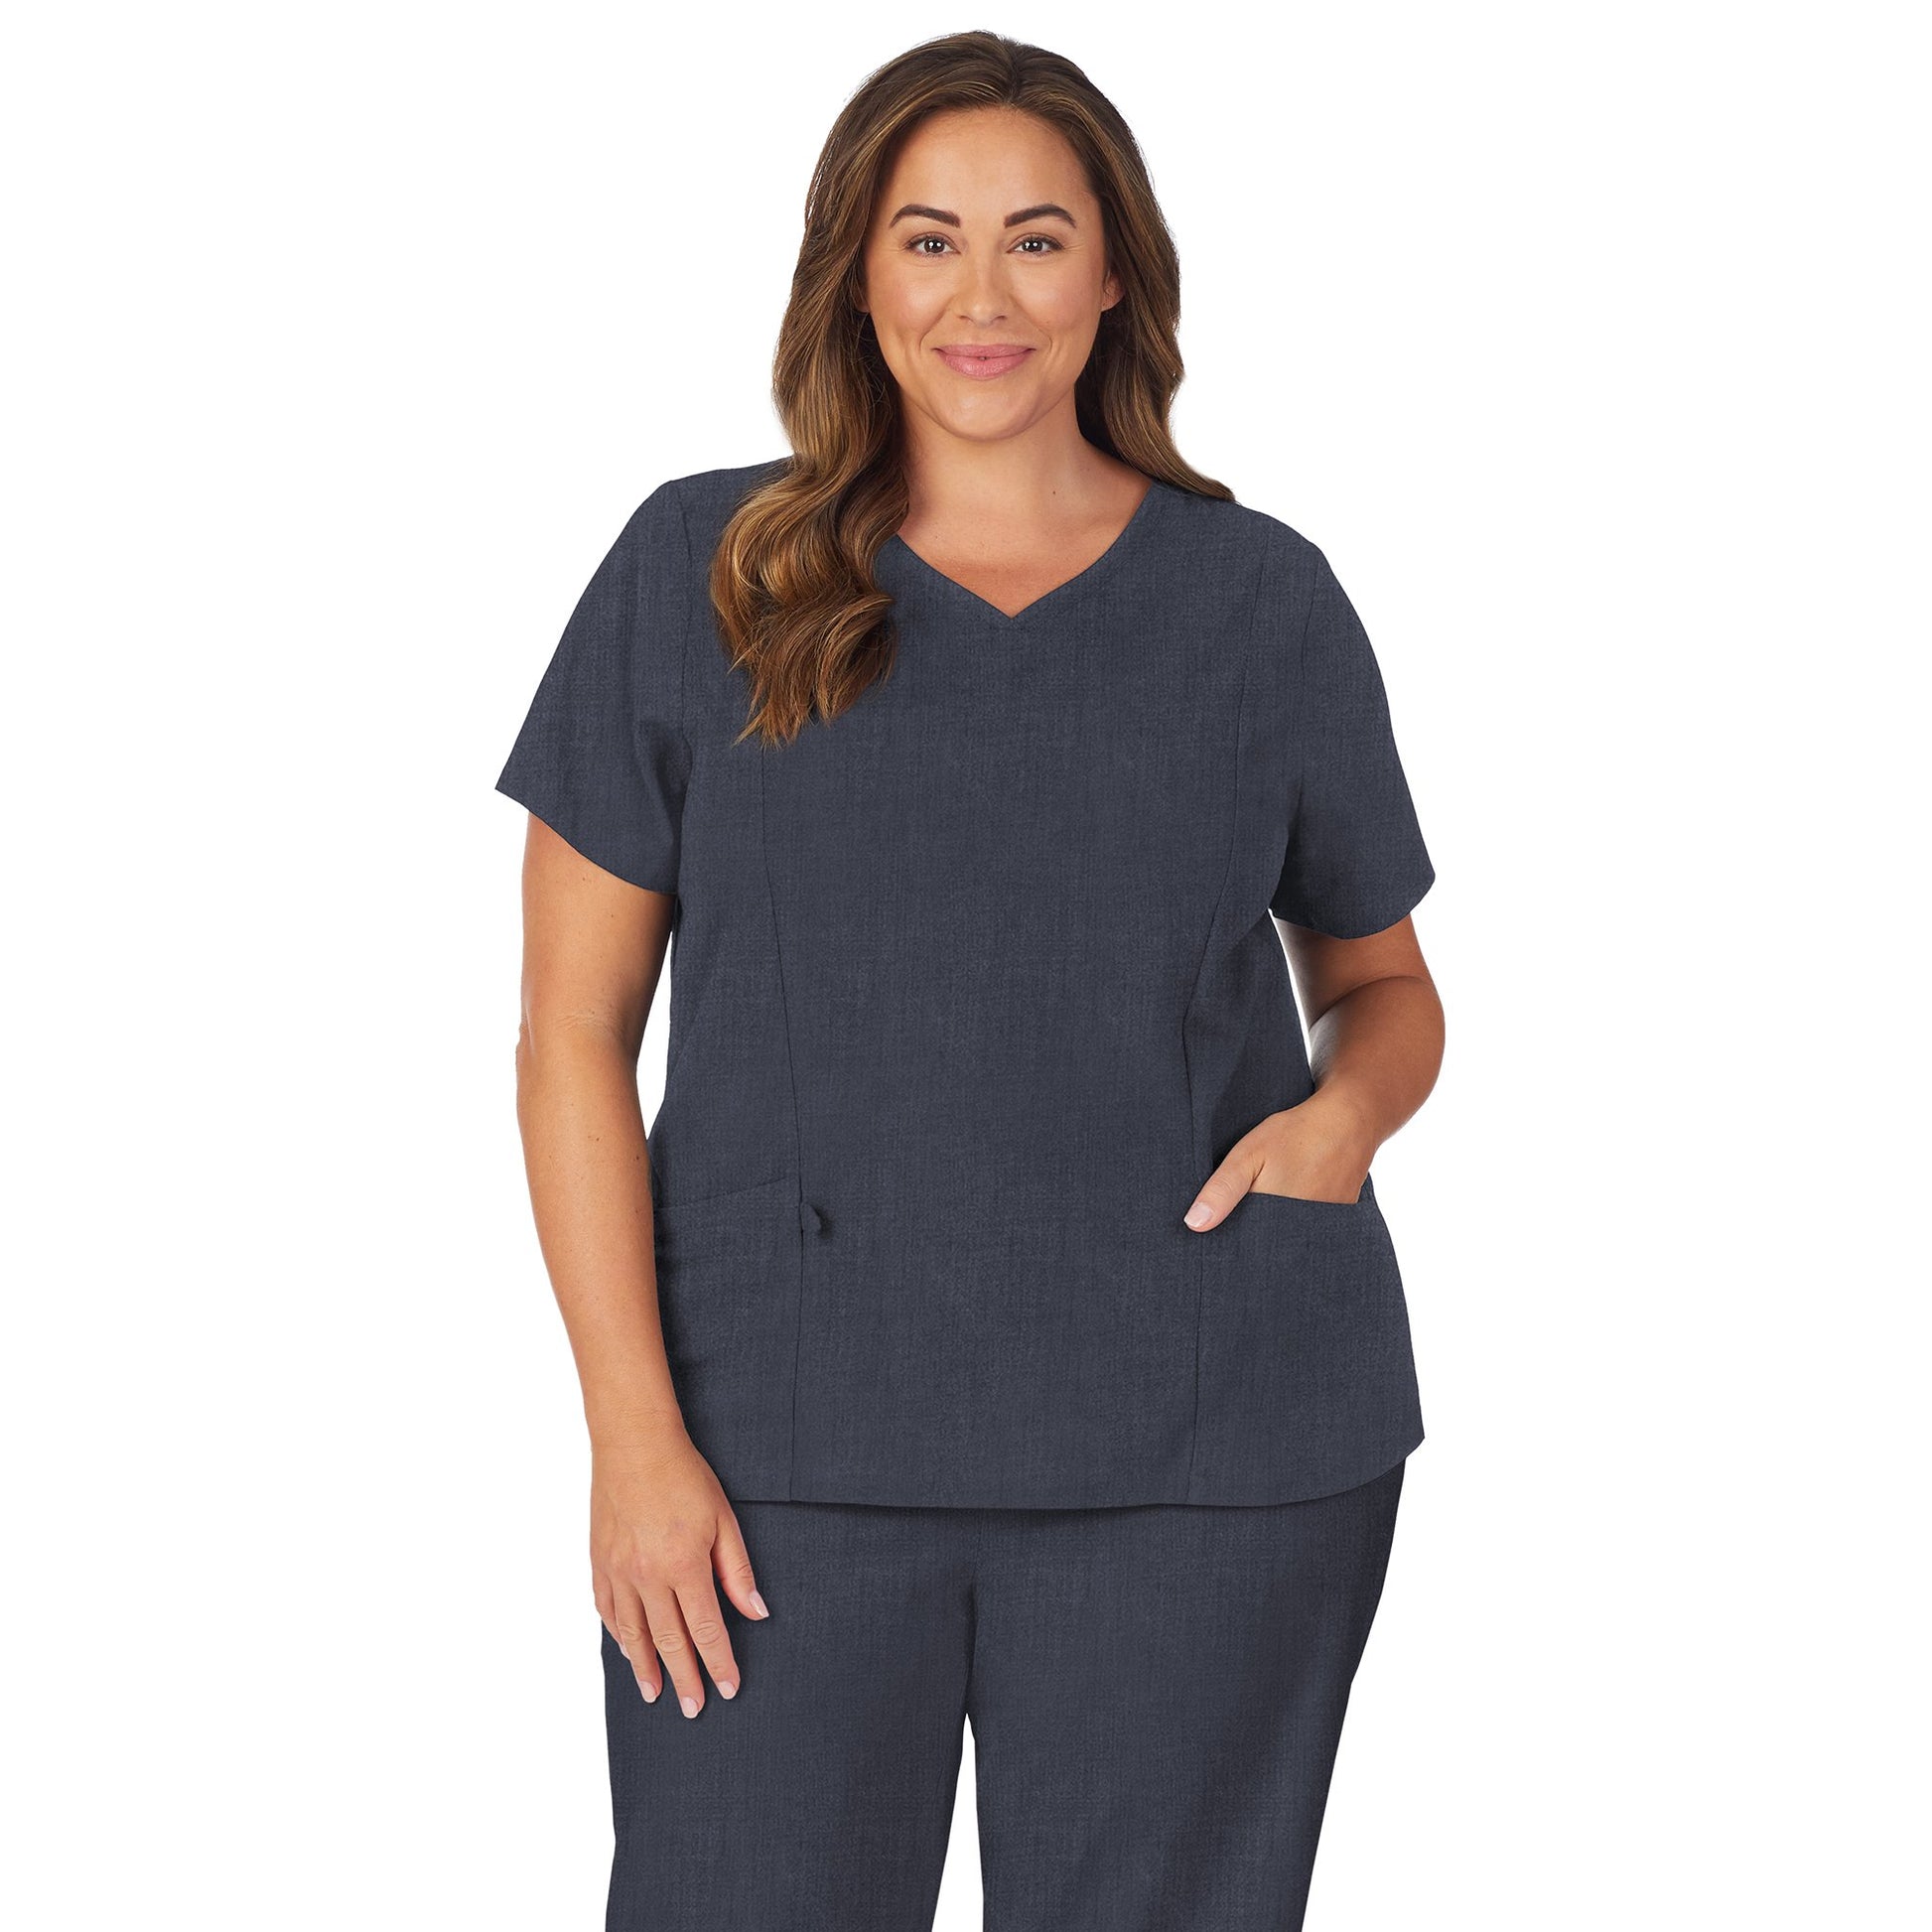 Navy Heather;Model is wearing size 1X. She is 5’9.5”, Bust 43”, Waist 37”, Hips 49.5”.@A lady wearing navy heather scrub v-neck top with side pockets plus.